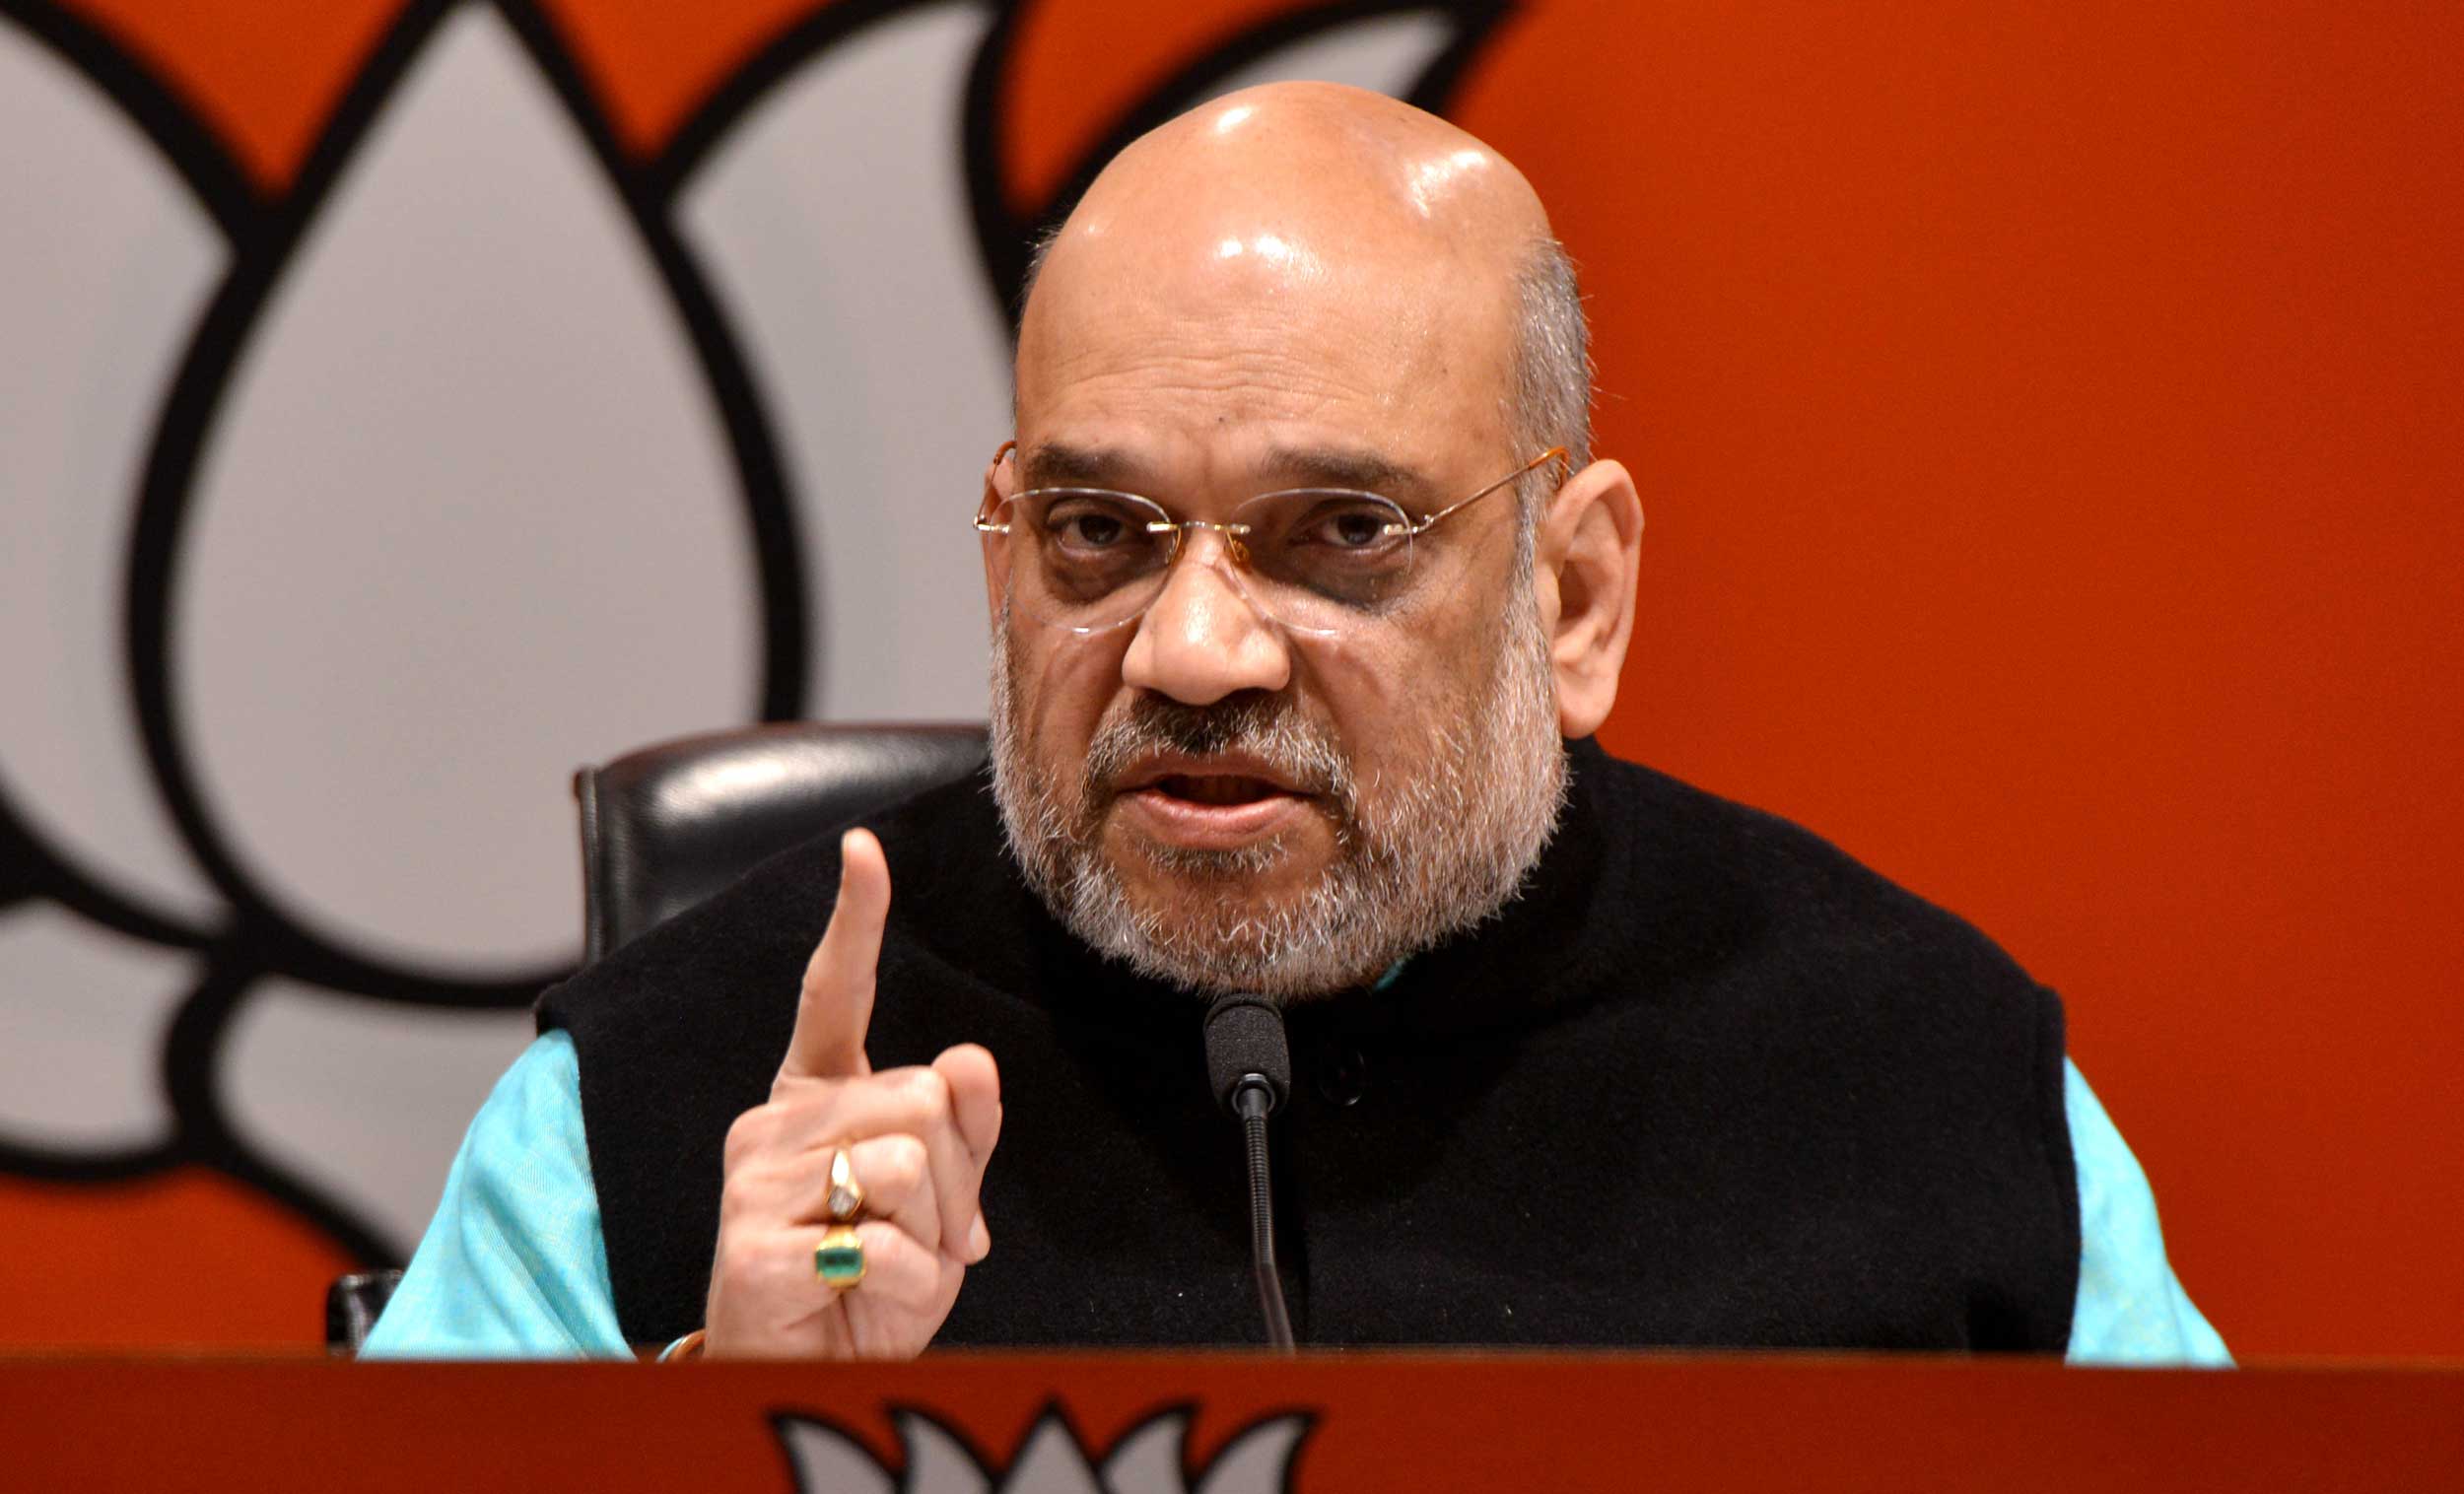 Union home minister Amit Shah also asked Congress leader Rahul Gandhi and NCP chief Sharad Pawar to tell the public if they support or oppose abrogation of Article 370